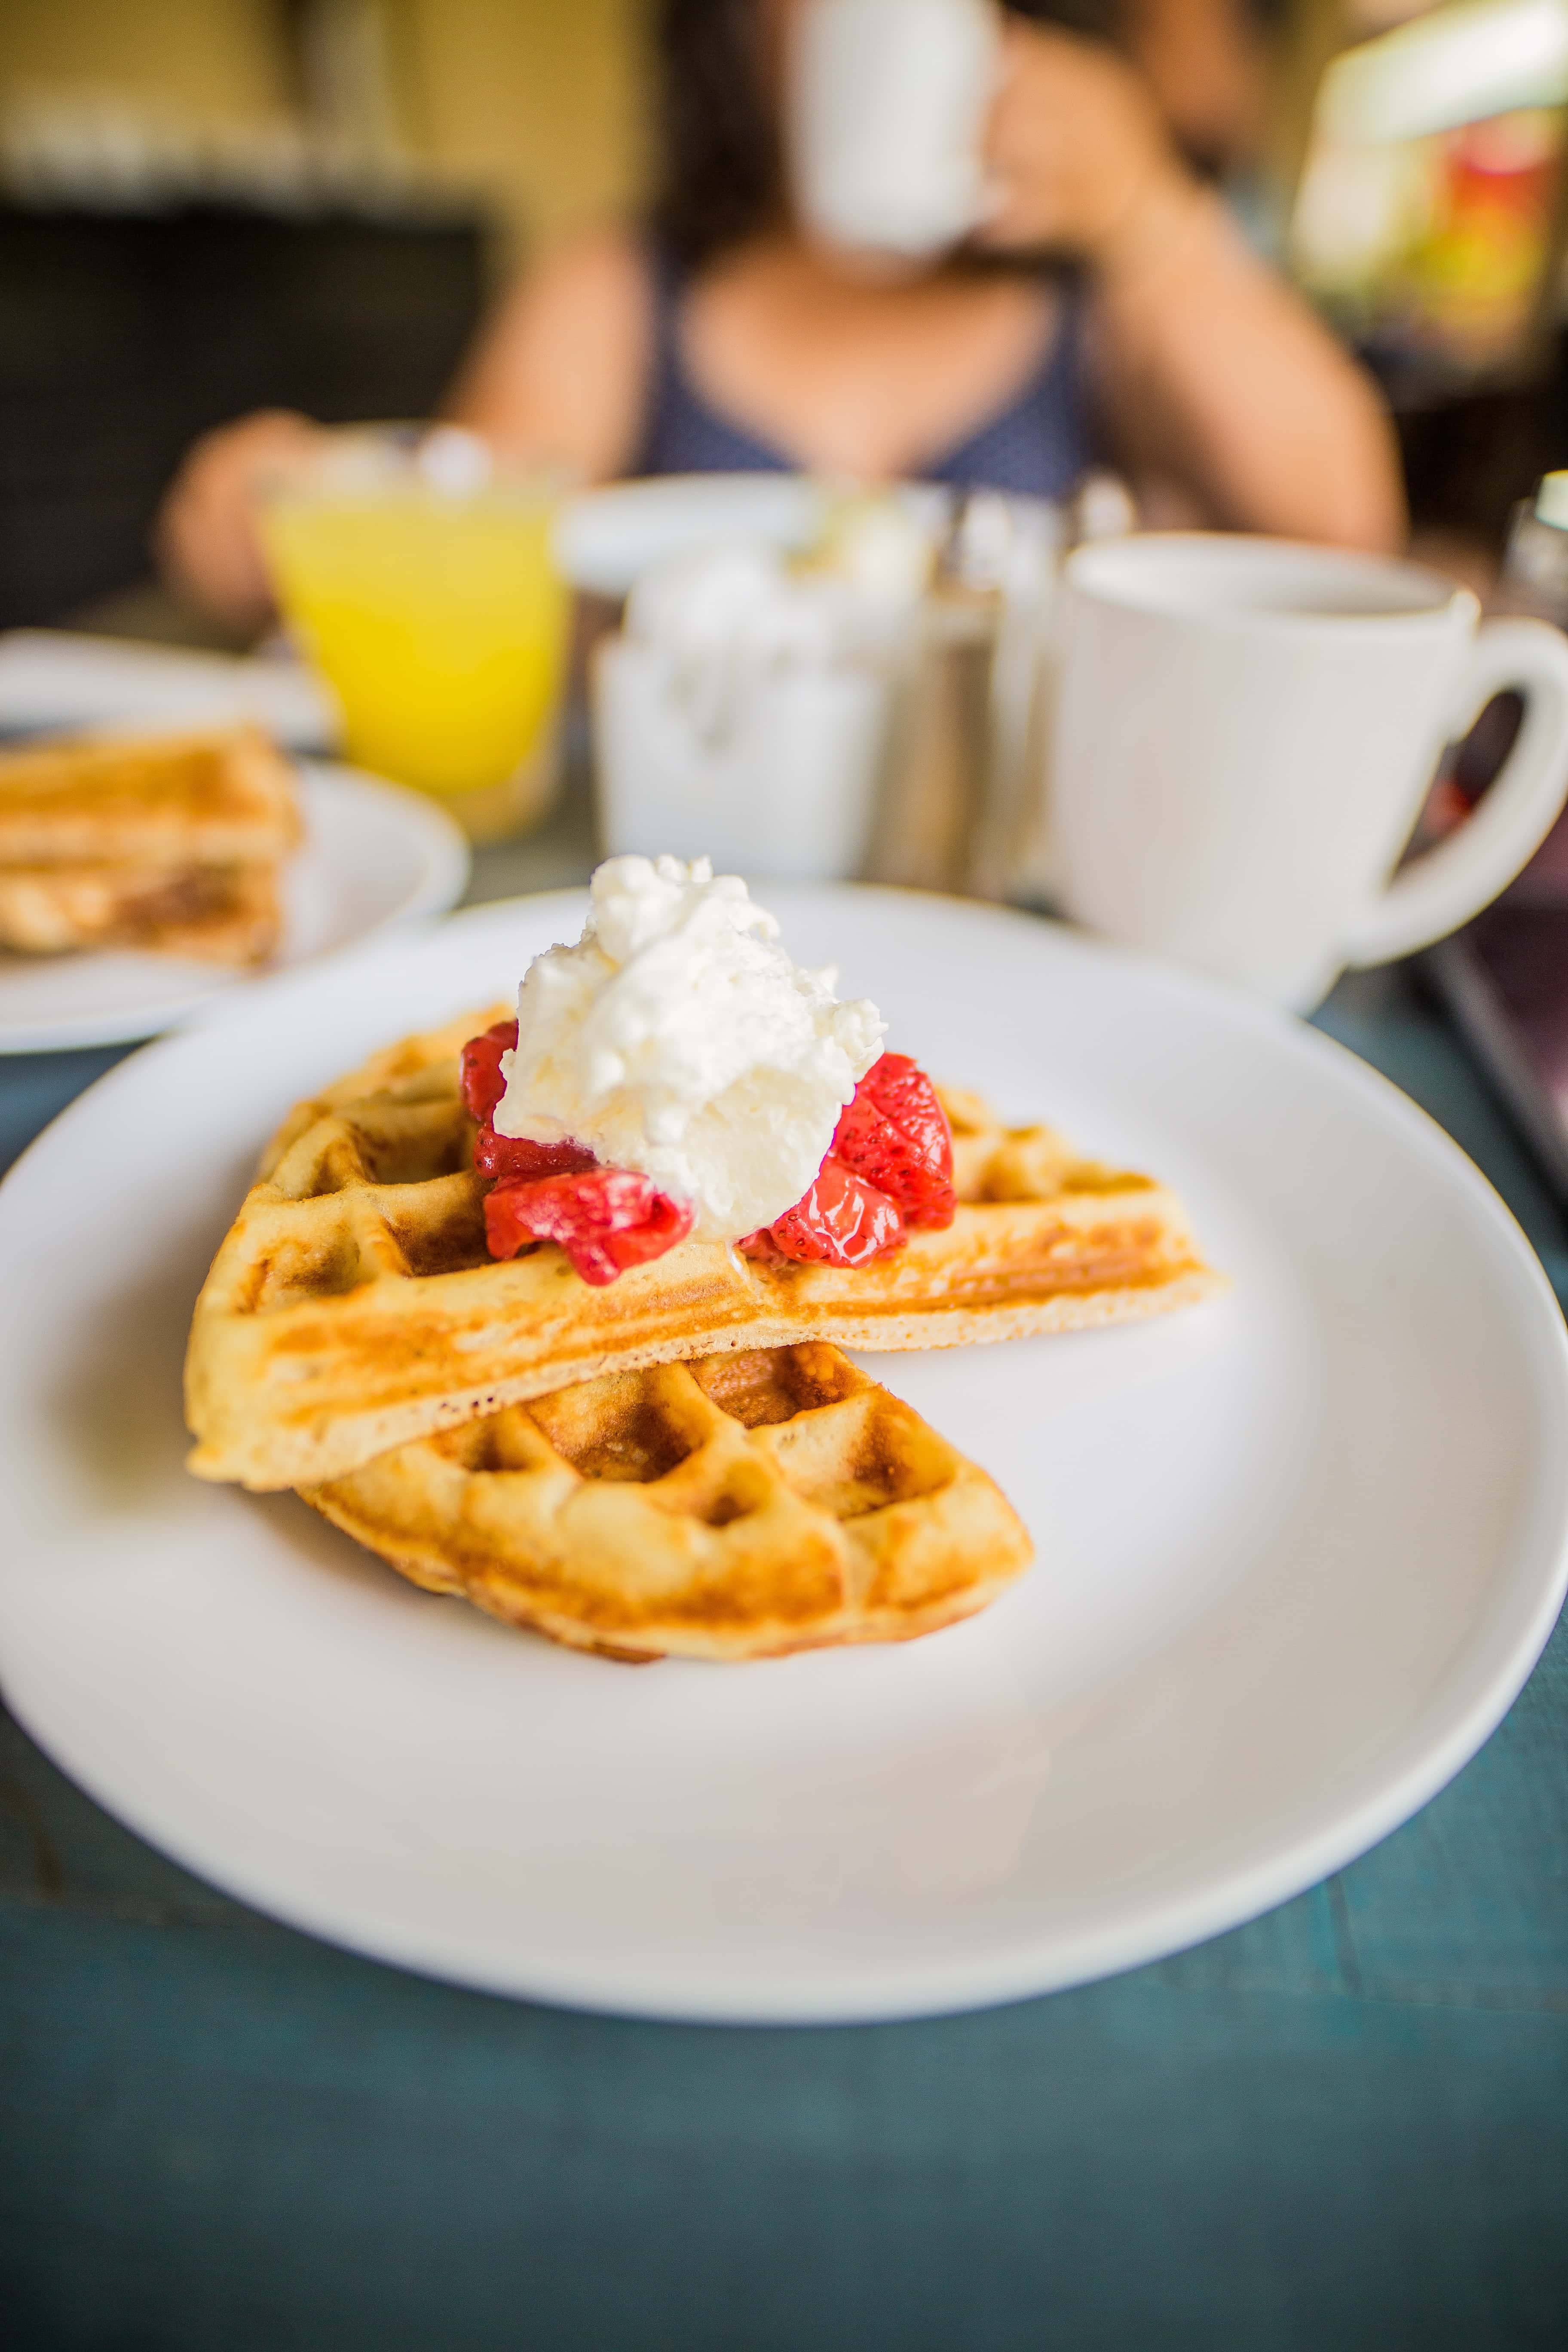 two-waffle-slices-on-white-plate-3023740